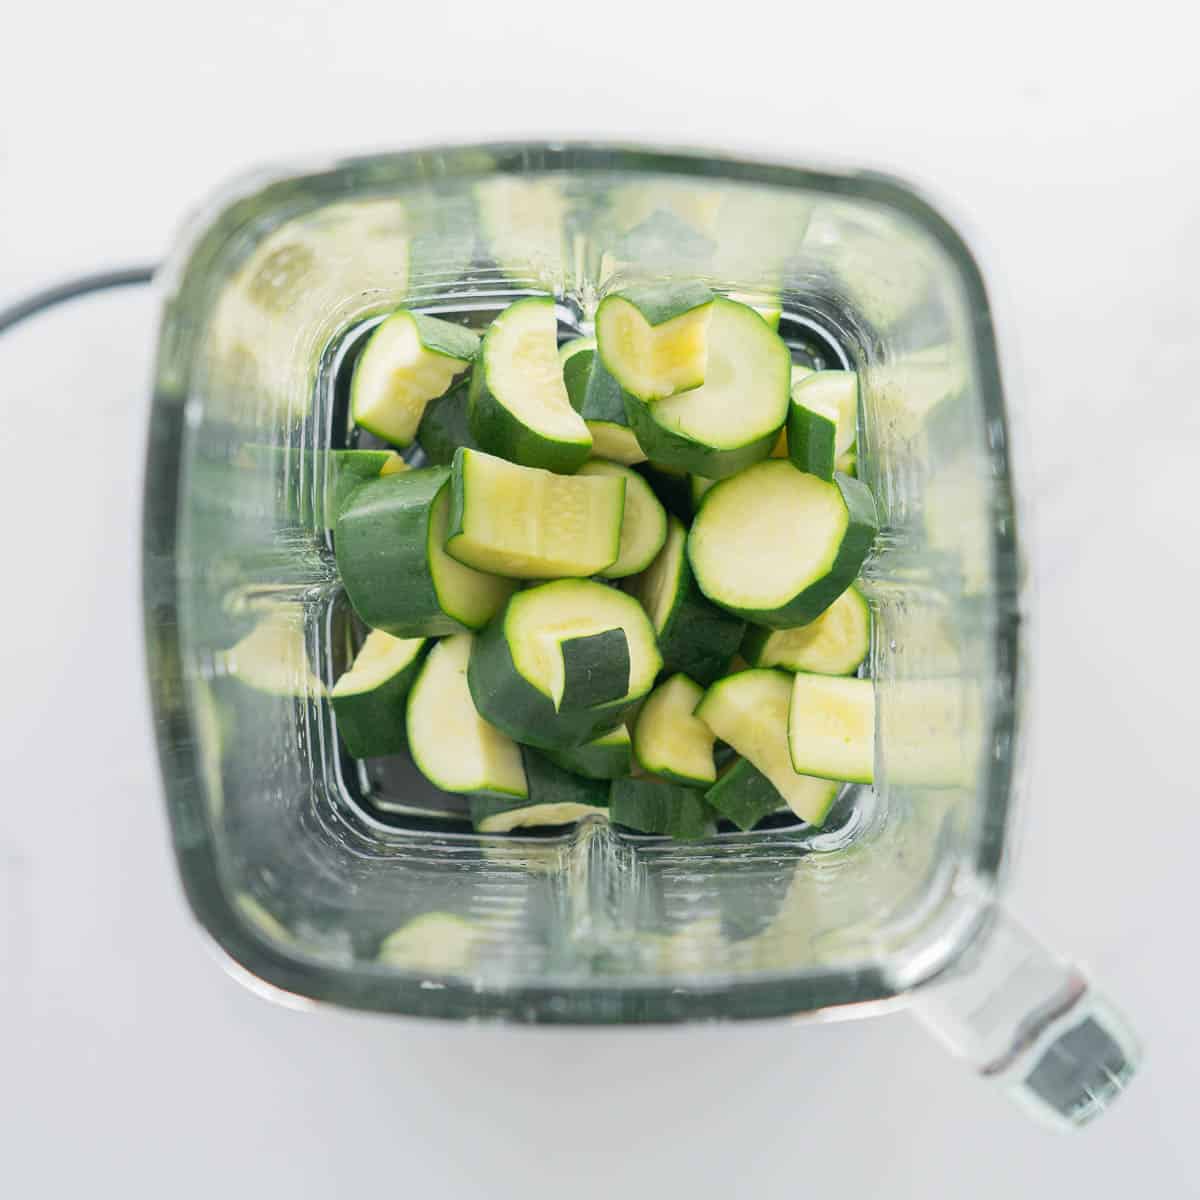 Steamed slices of zucchini in a glass blender jug.